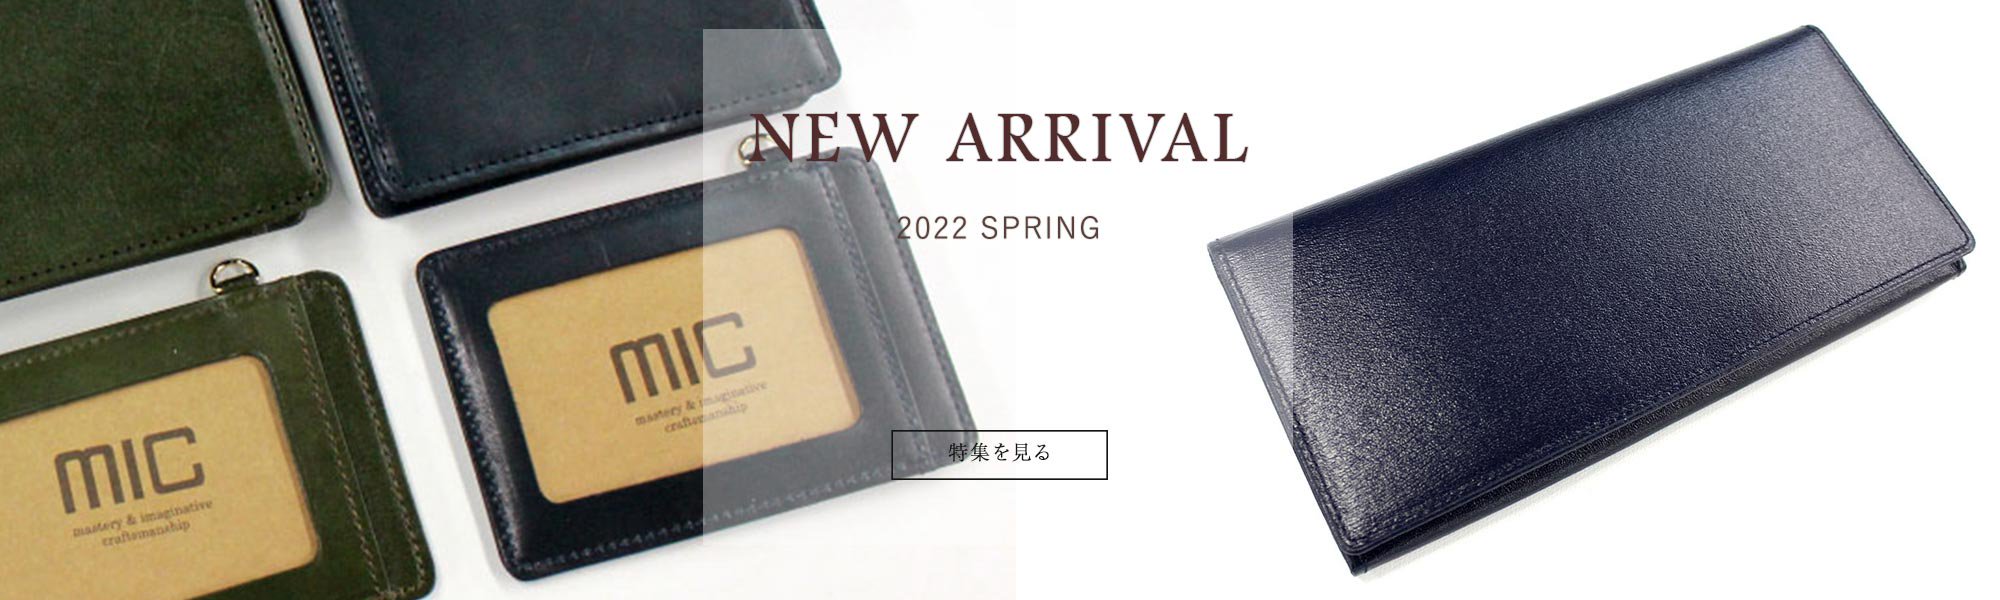 2022 NEW ARRIVAL SPRING